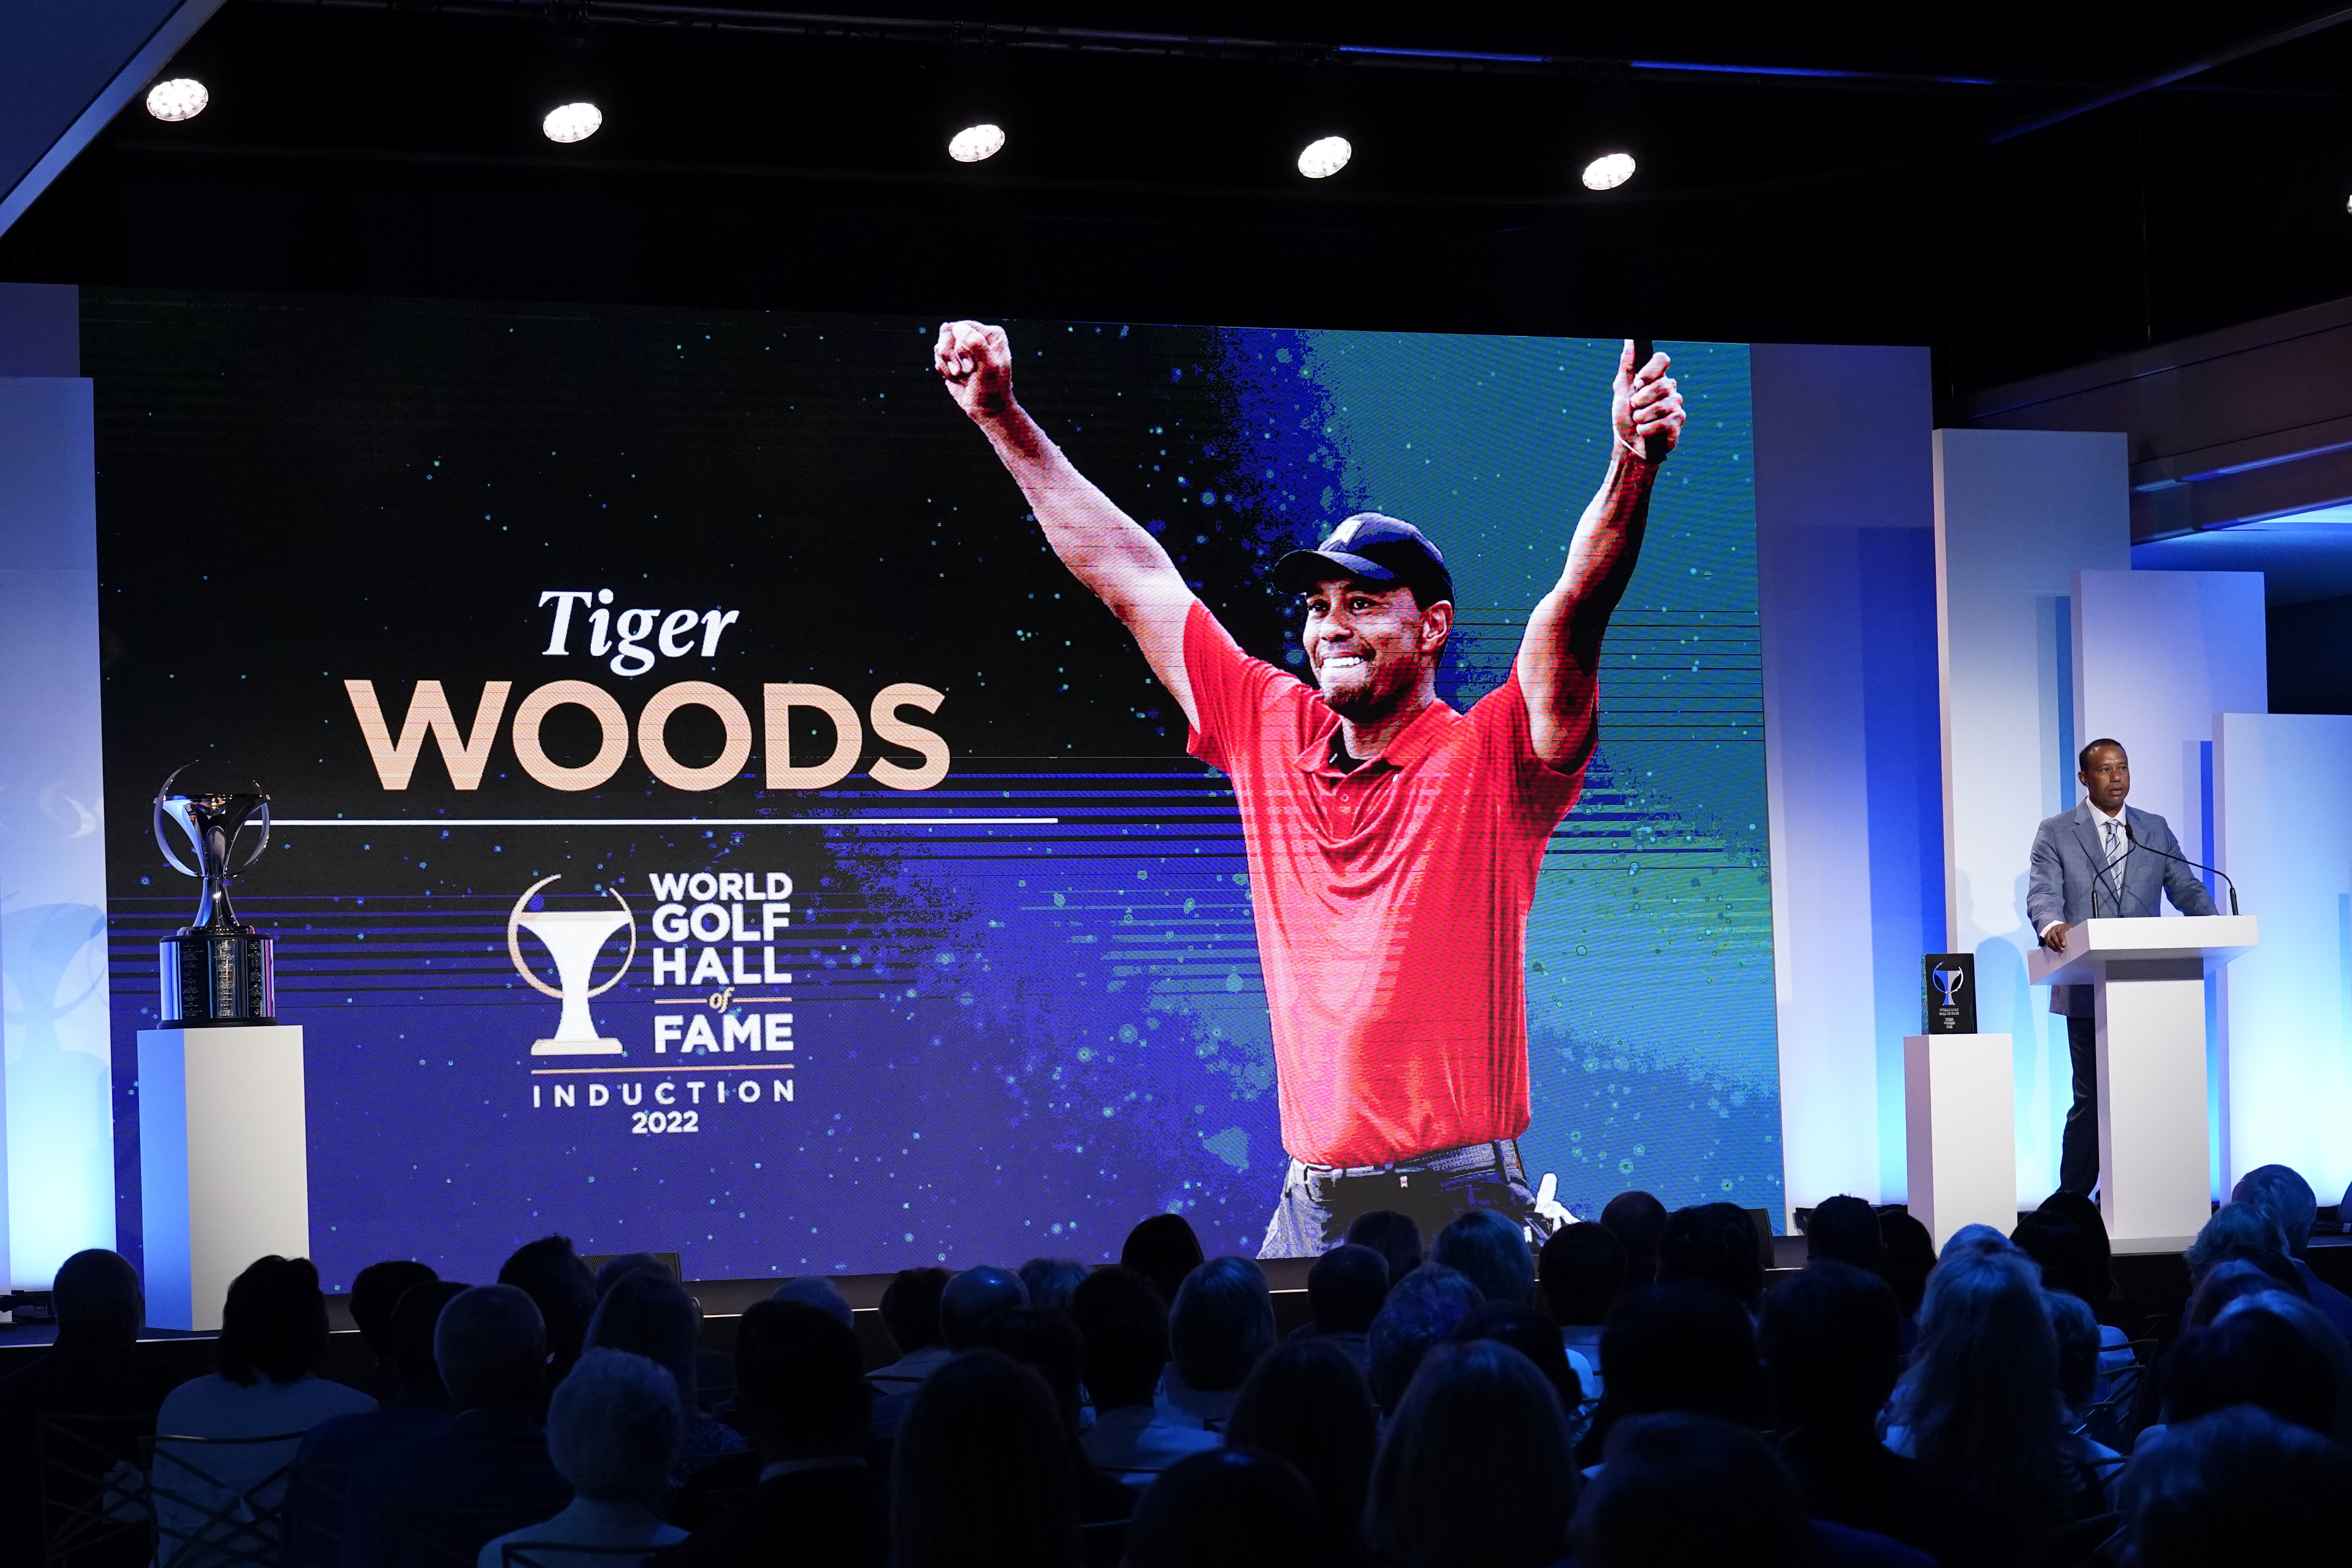 Tiger Woods speaks during his induction into the World Golf Hall of Fame on Wednesday night (Gerald Herbert/AP)